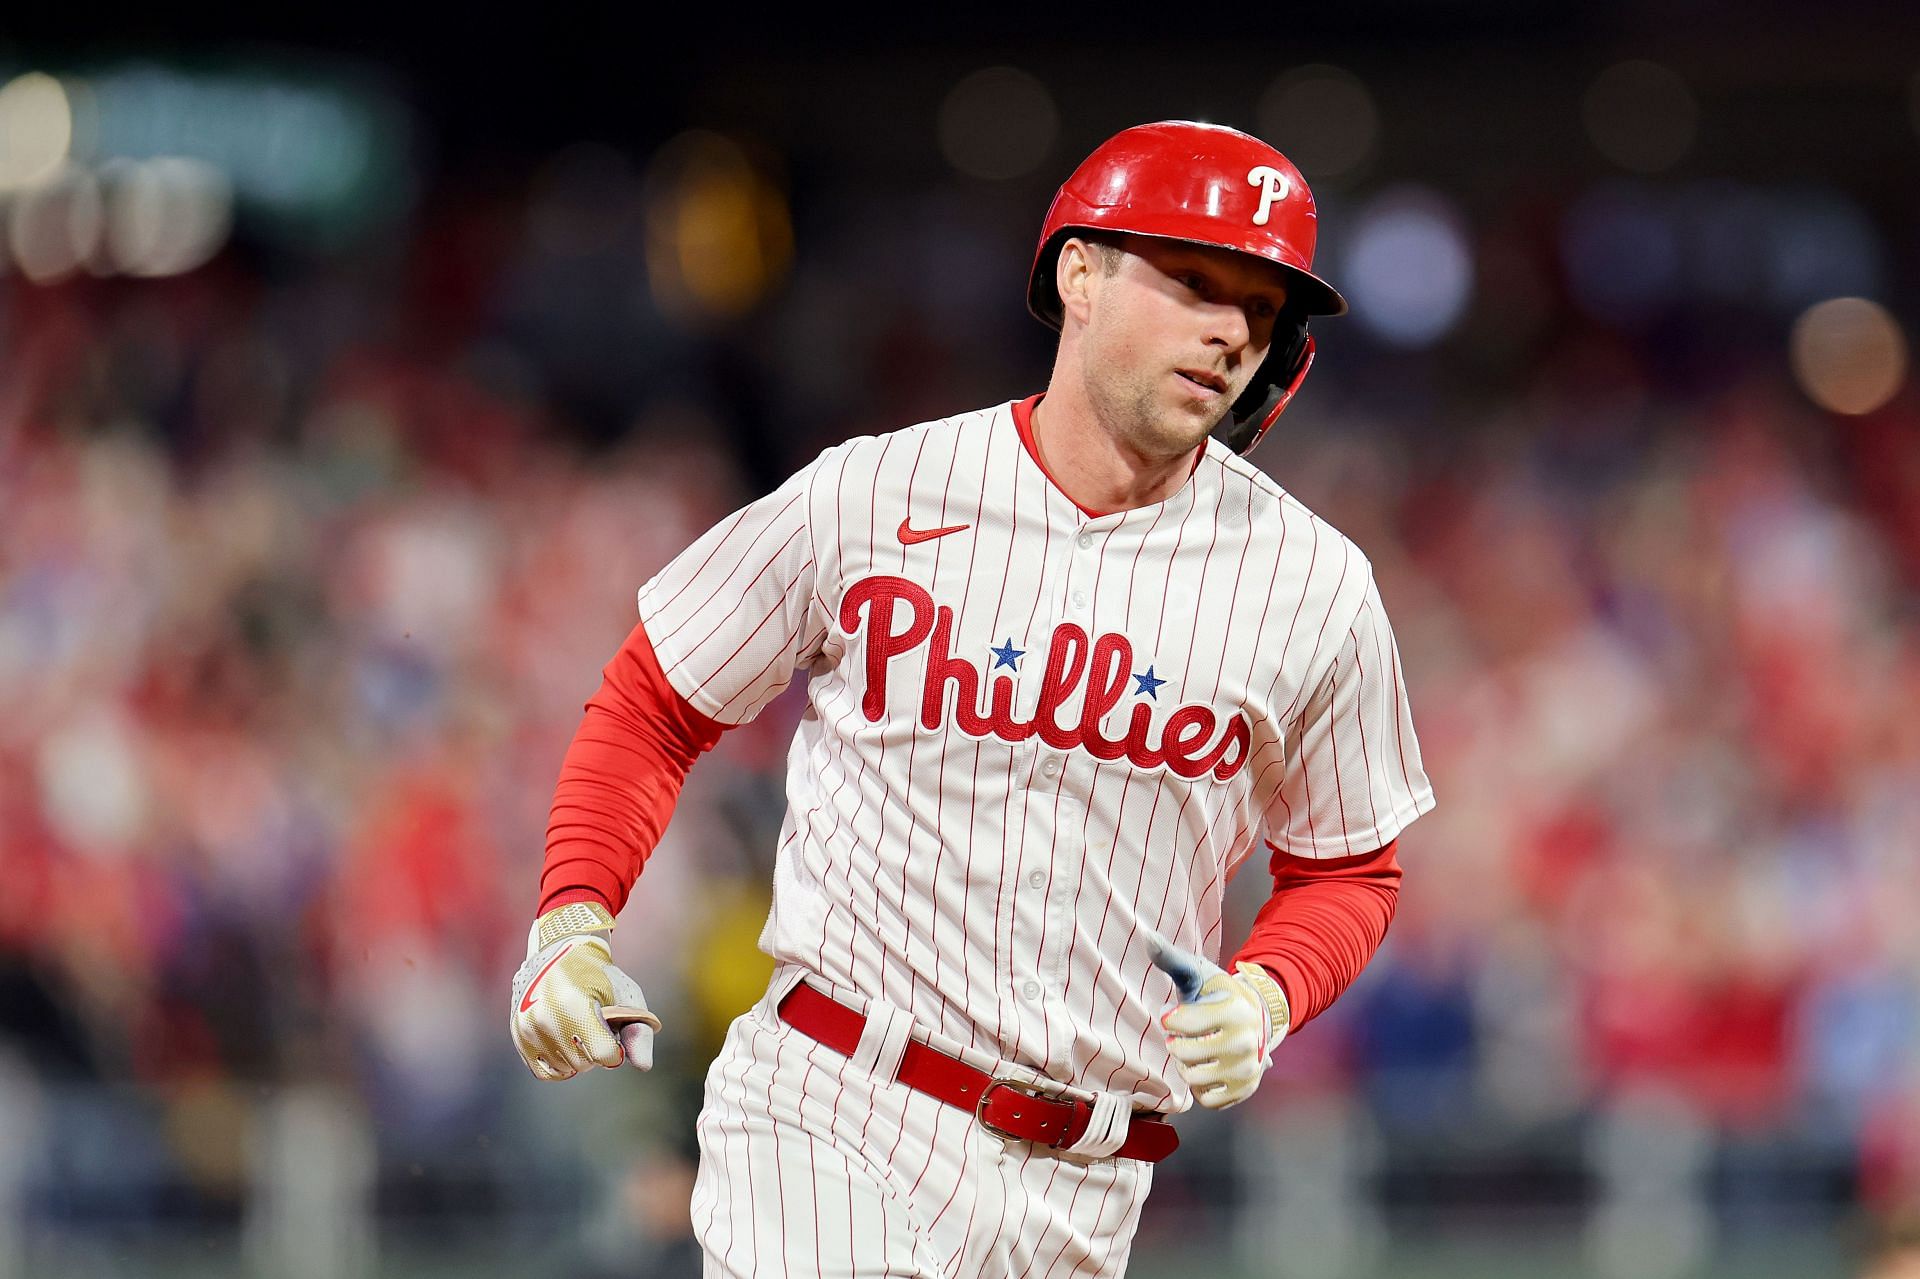 Philadelphia Phillies fans react to Rhys Hoskins being carted off the